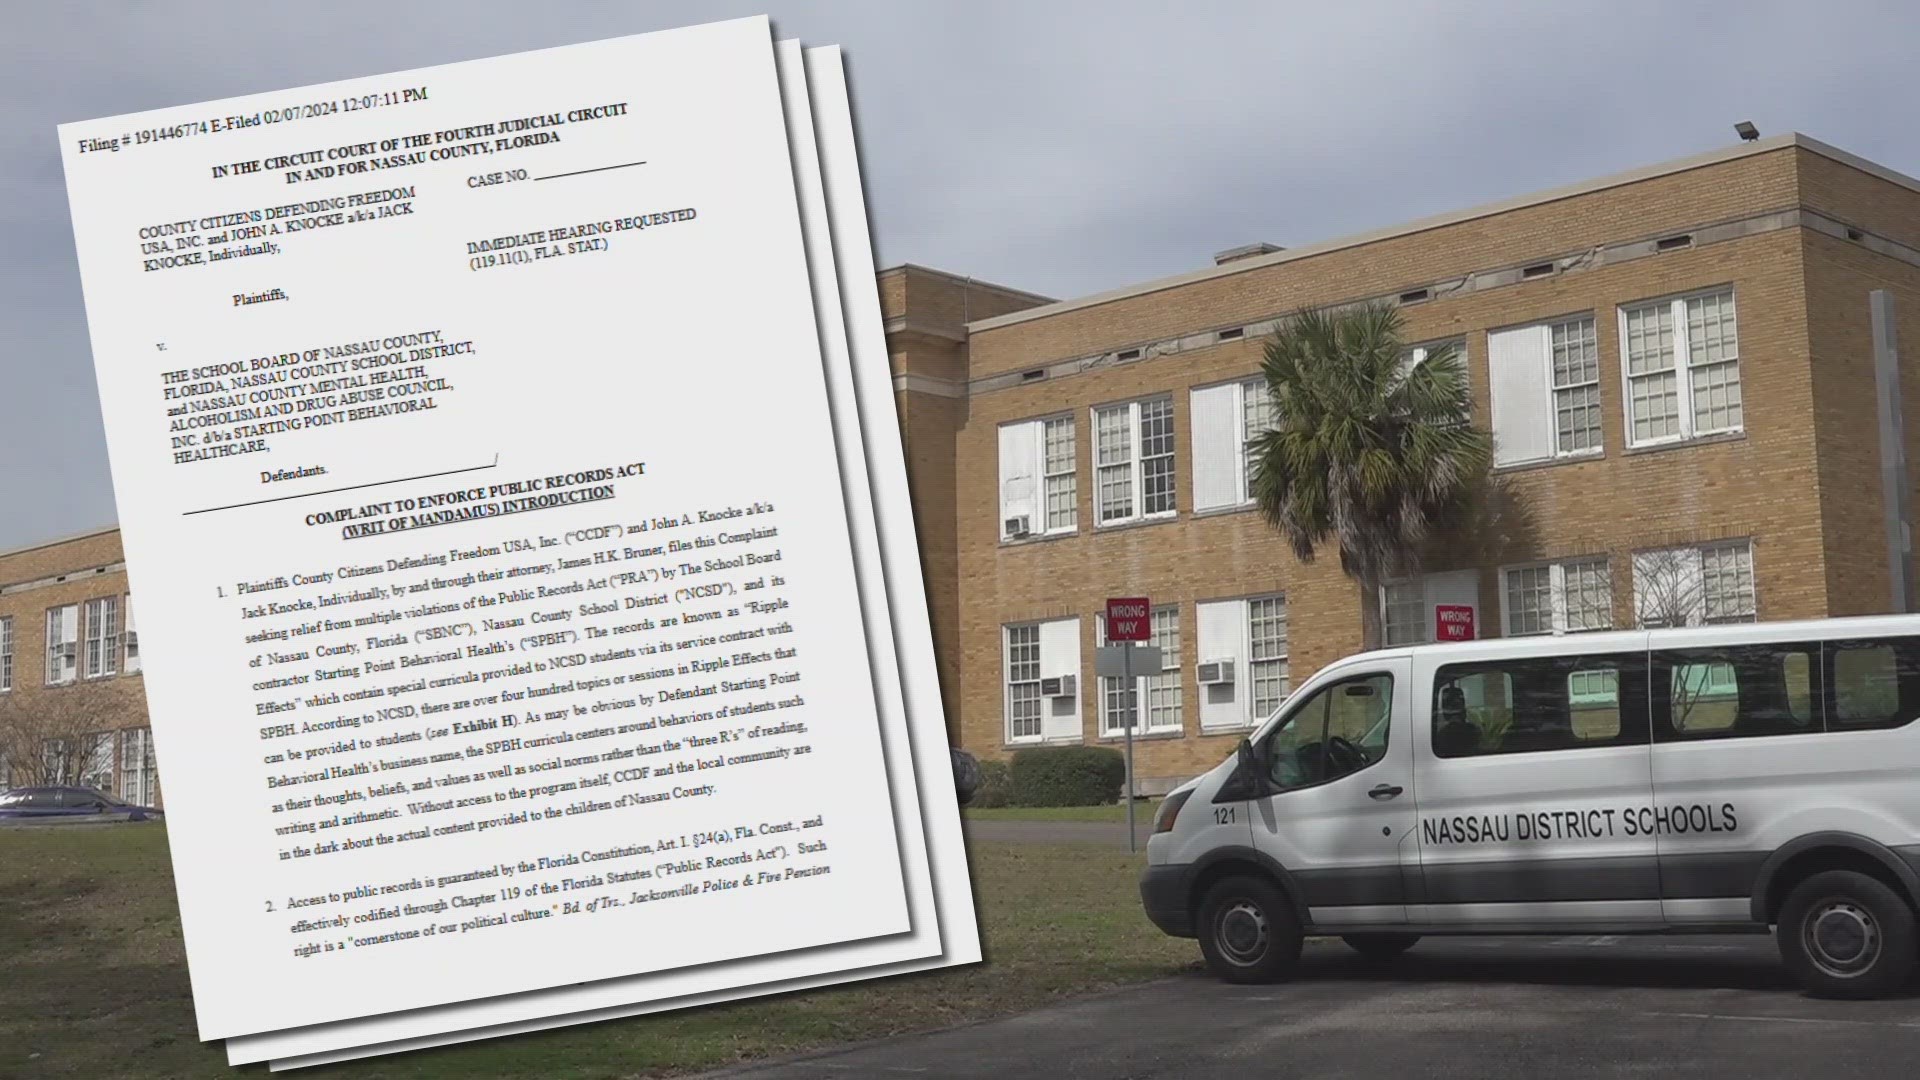 Citizens Defending Freedom filed the lawsuit after they claimed the district failed to turn over student health material for their review.